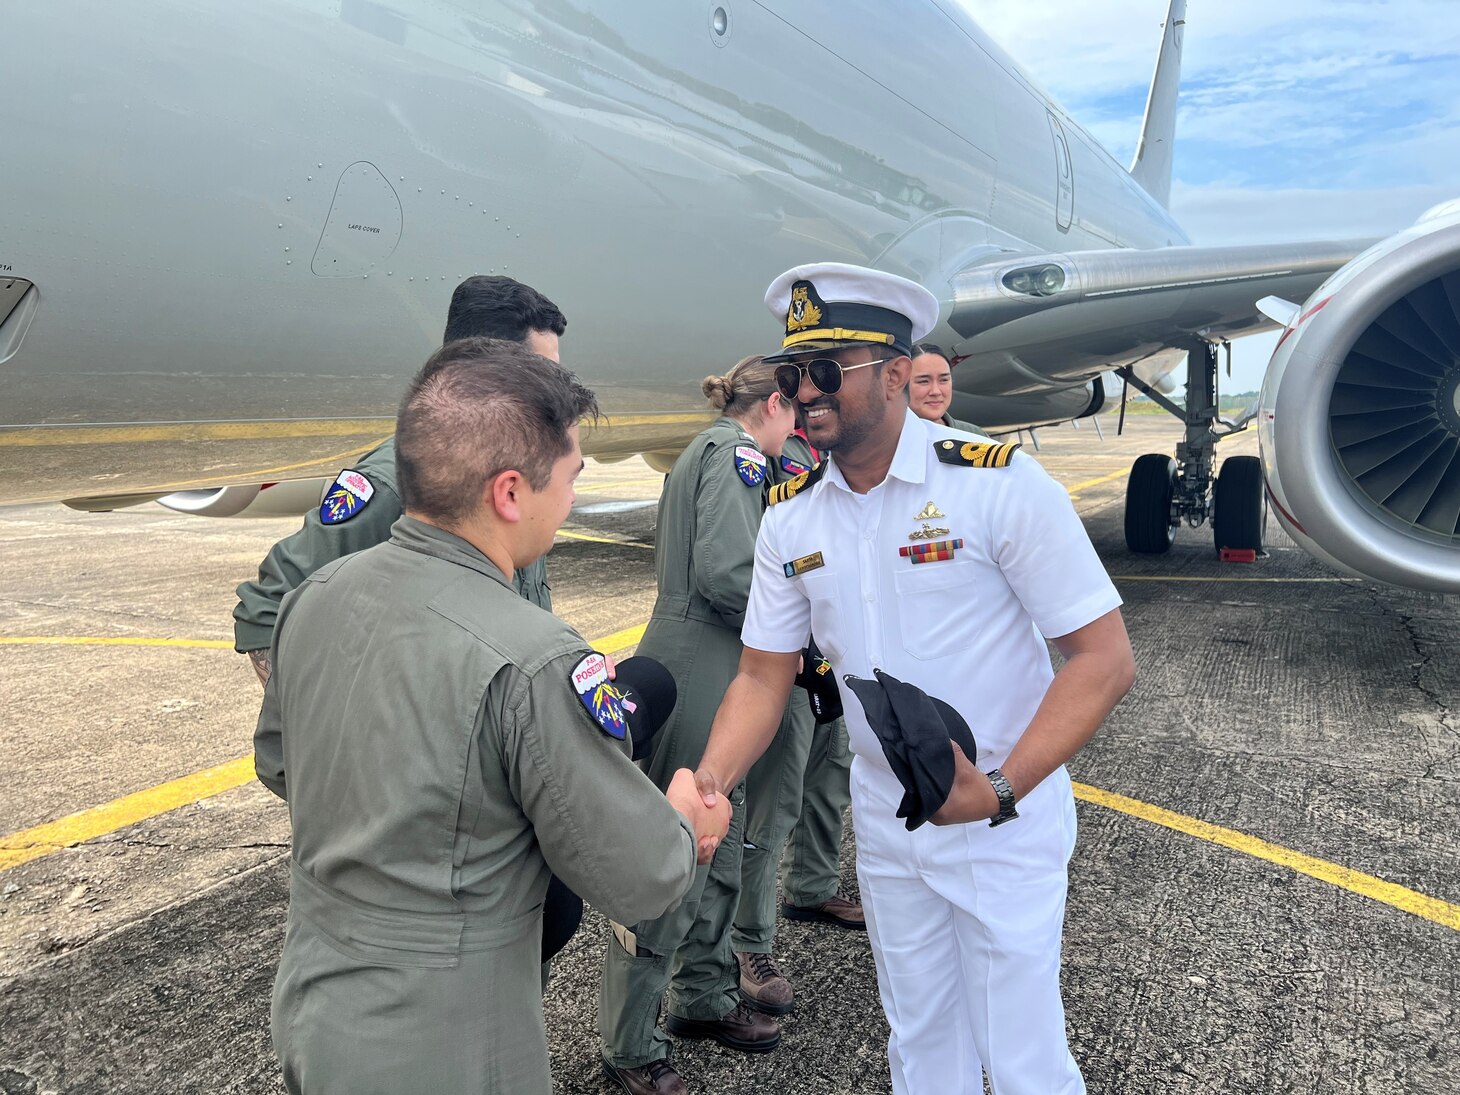 (230124-N-FY142-0003) COLOMBO, Sri Lanka (Jan. 24, 2023) – Lt. Cmdr. Harischandra presents Patrol Squadron (VP) 10 and Combat Aircrew 5 with hats as a token of appreciation for their involvement in the Sri Lanka Cooperation Afloat Readiness and Training/Marine Exercise. VP-10 is currently operating from Kadena Air Base in Okinawa, Japan. The squadron conducts maritime patrol and reconnaissance, as well as theater outreach operations, as part of a rotational deployment to the U.S. 7th Fleet area of operations. (U.S. Navy photo by Lt. j.g. Brian DePaola)